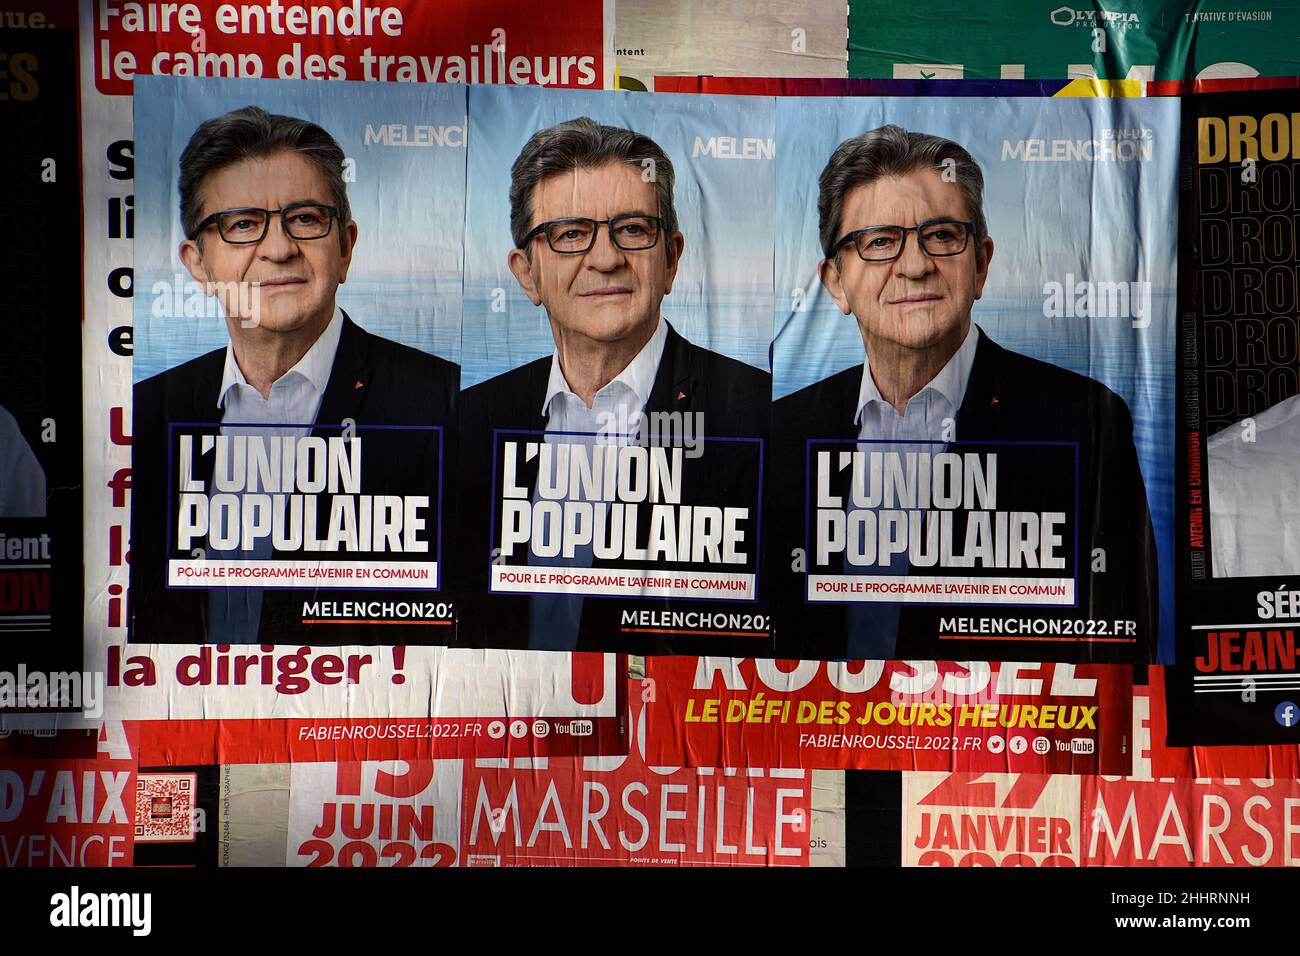 Marseille, France. 25th Jan, 2022. Posters of Jean-Luc Mélenchon are seen  on display.Posters campaign of Nathalie Arthaud, Fabien Roussel, Philippe  Poutou and Jean-Luc Mélenchon, candidates for the French presidential  elections of 2022.